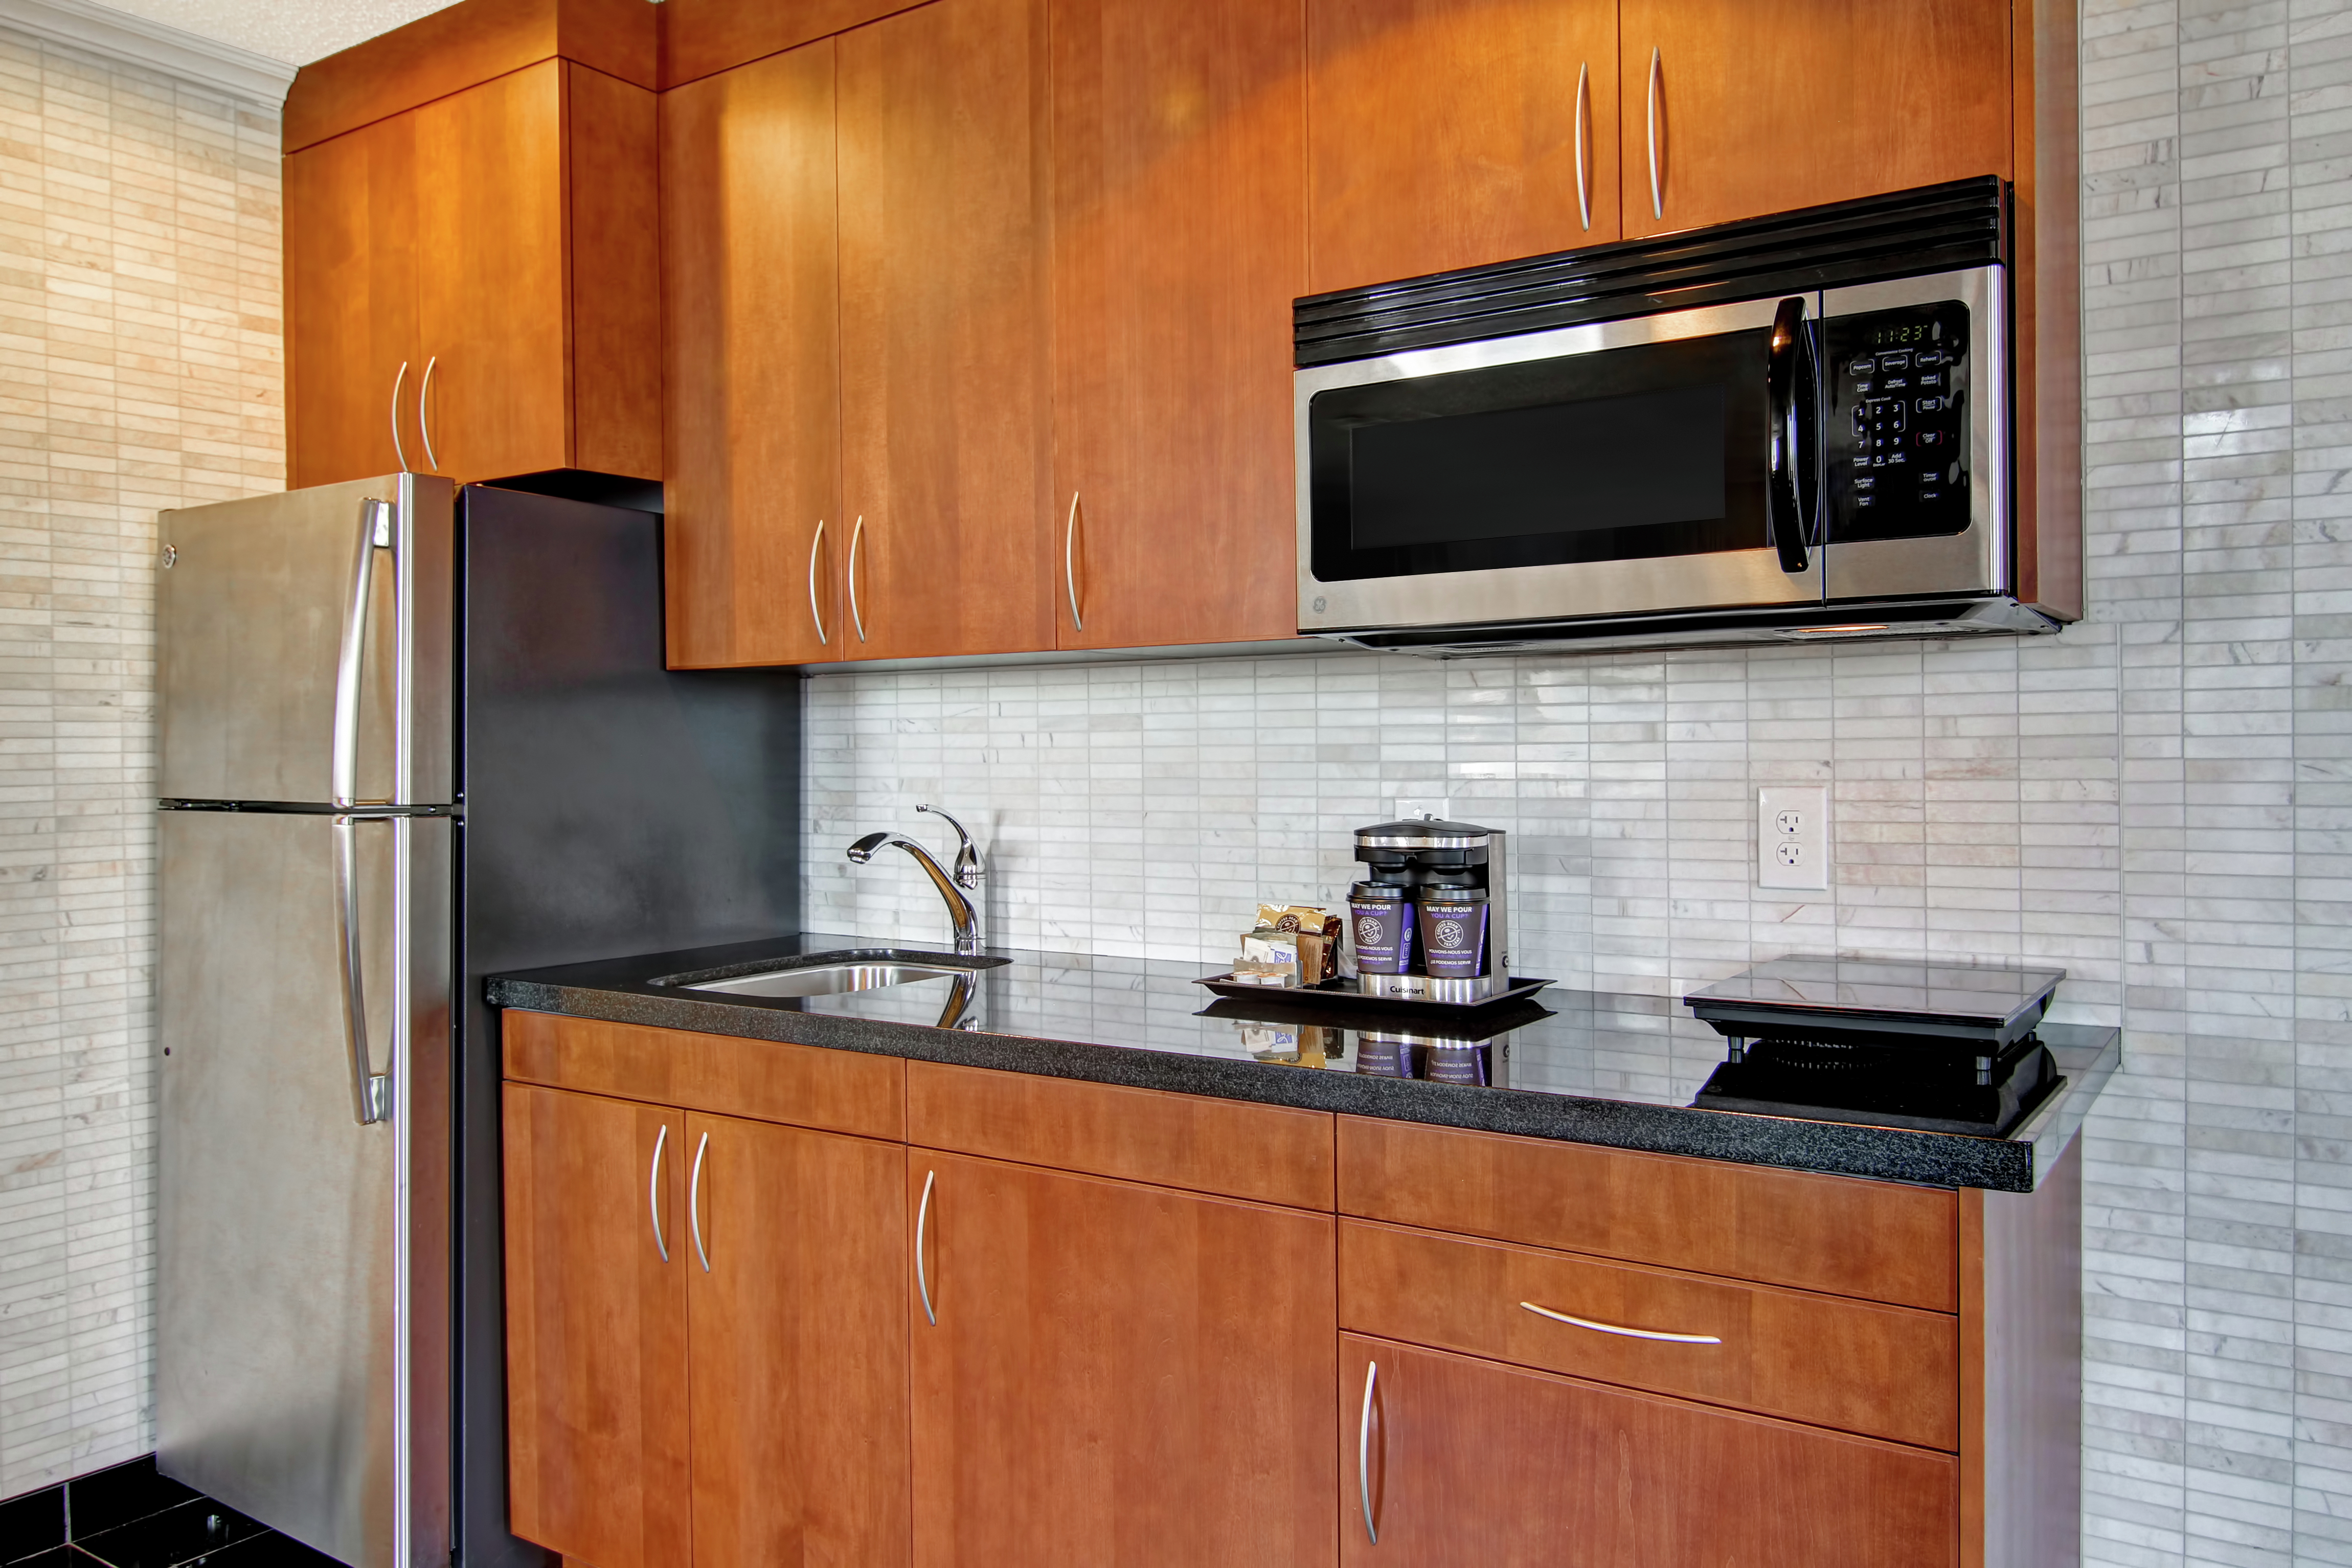 Suite Kitchenette with Microwave and Full-Sized Refrigerator